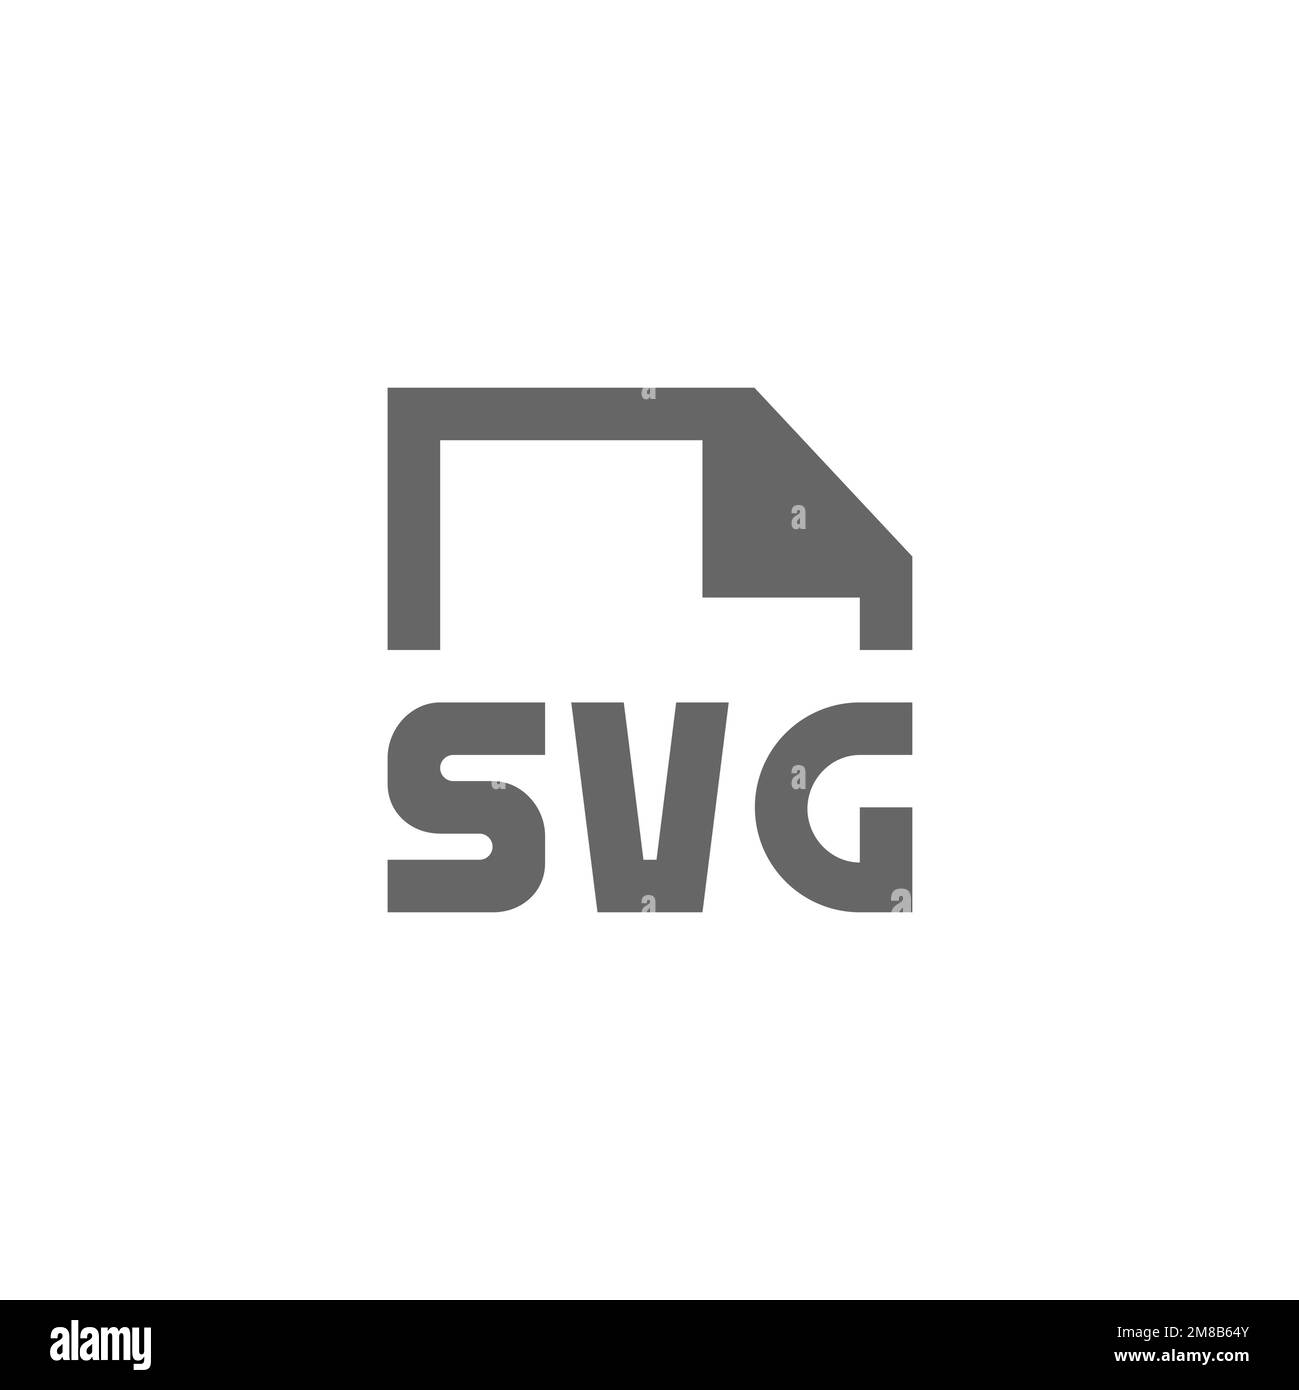 svg file type flat icon, graphic resource template, vector illustration. Stock Vector